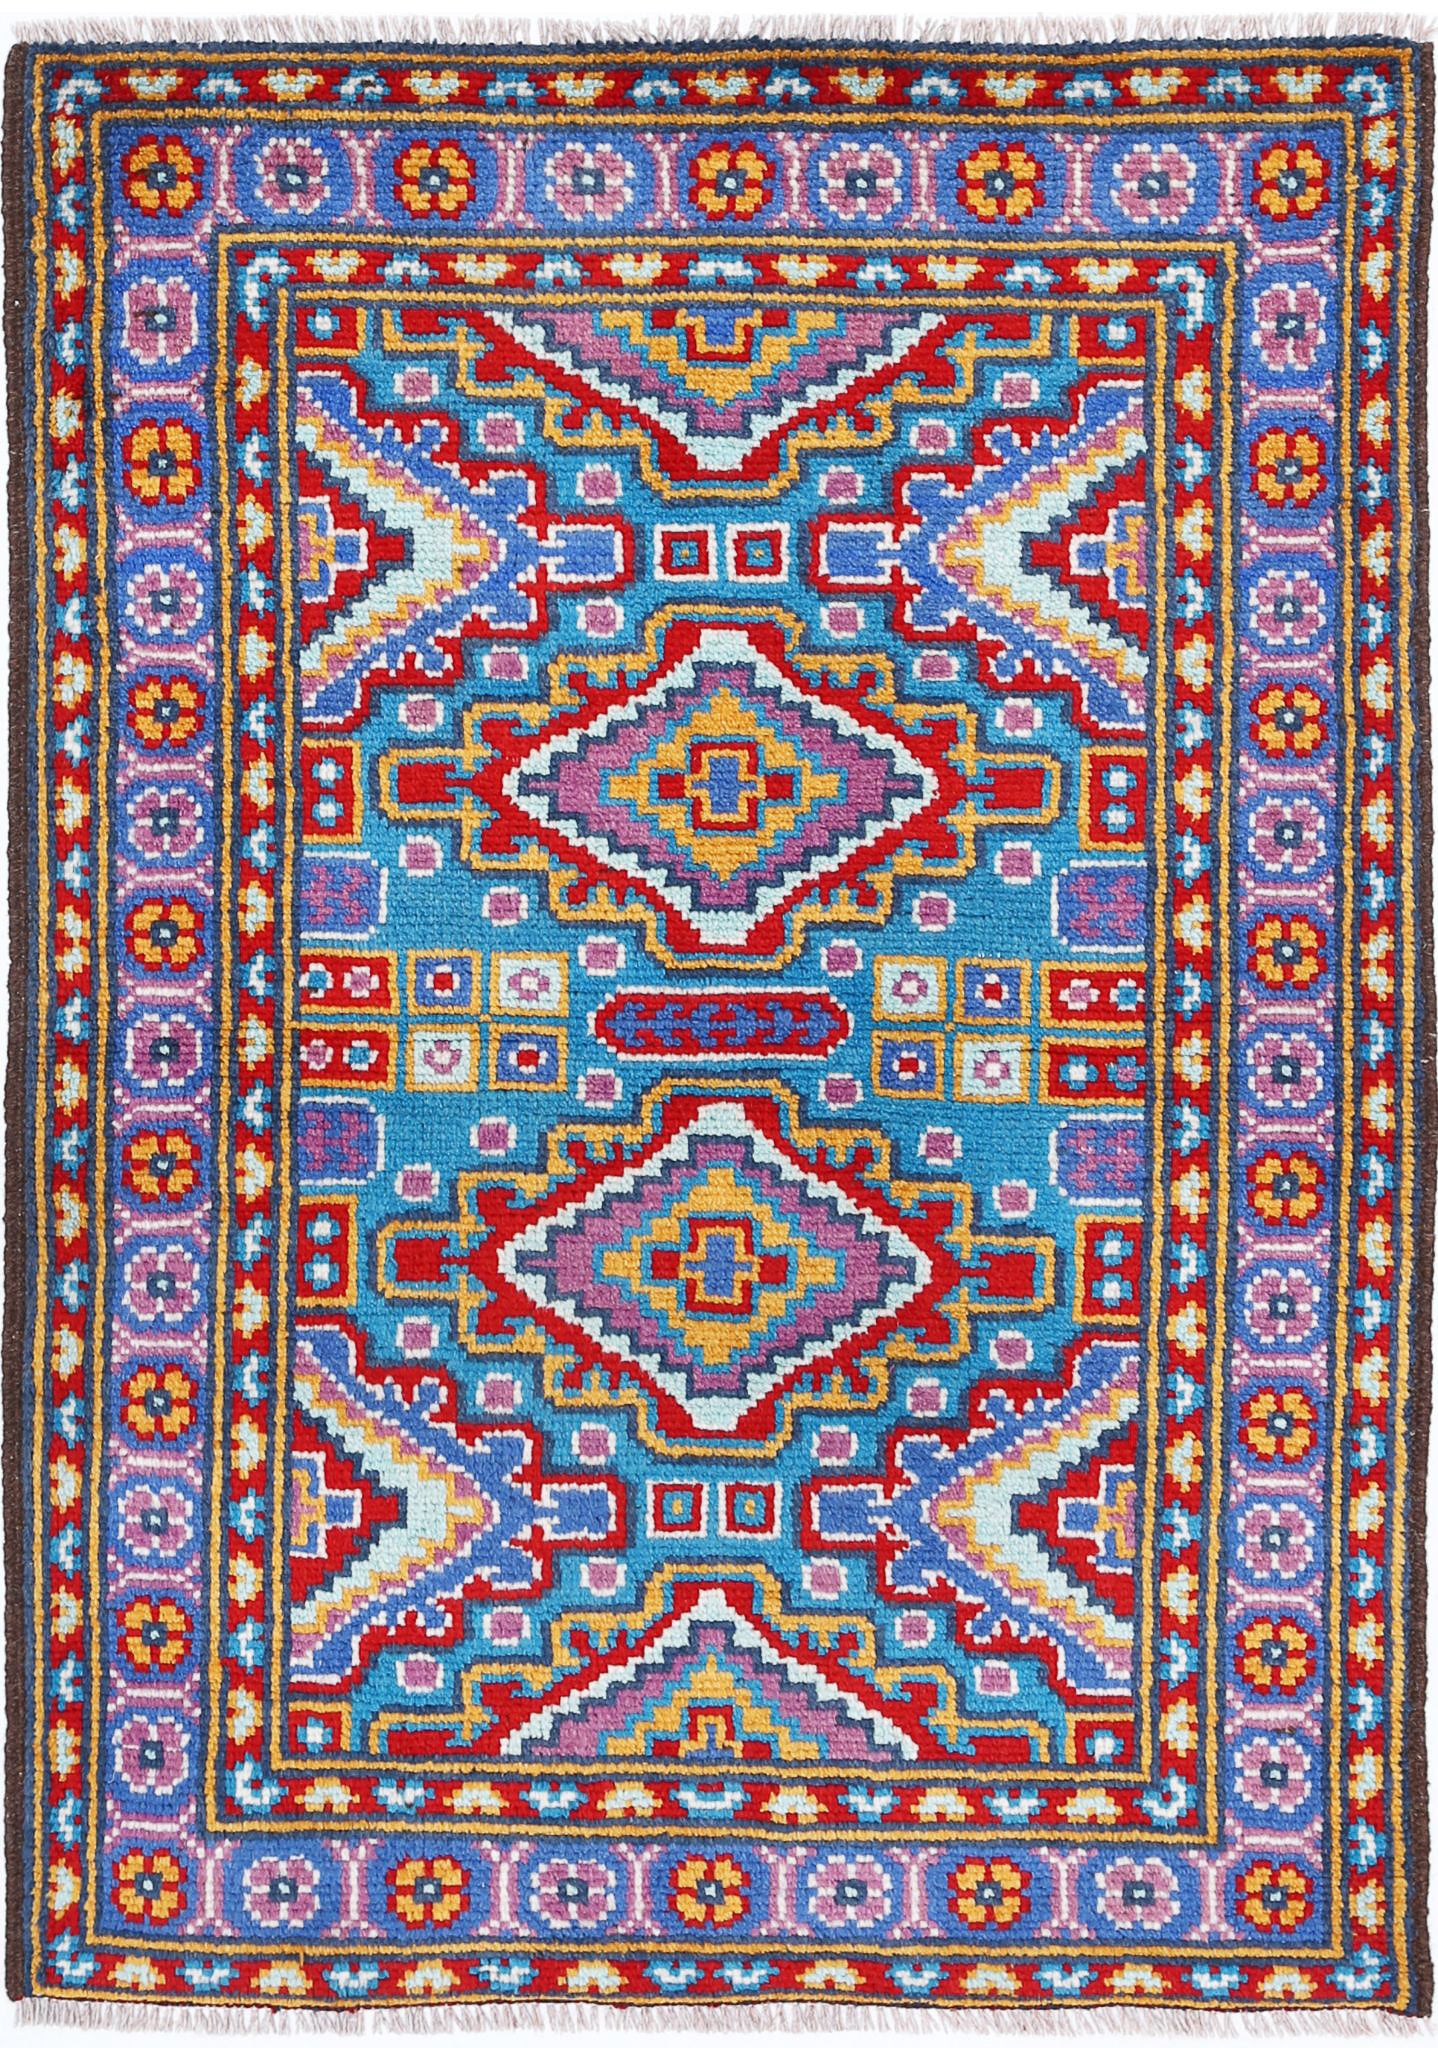 Revival-hand-knotted-qarghani-wool-rug-5014010.jpg